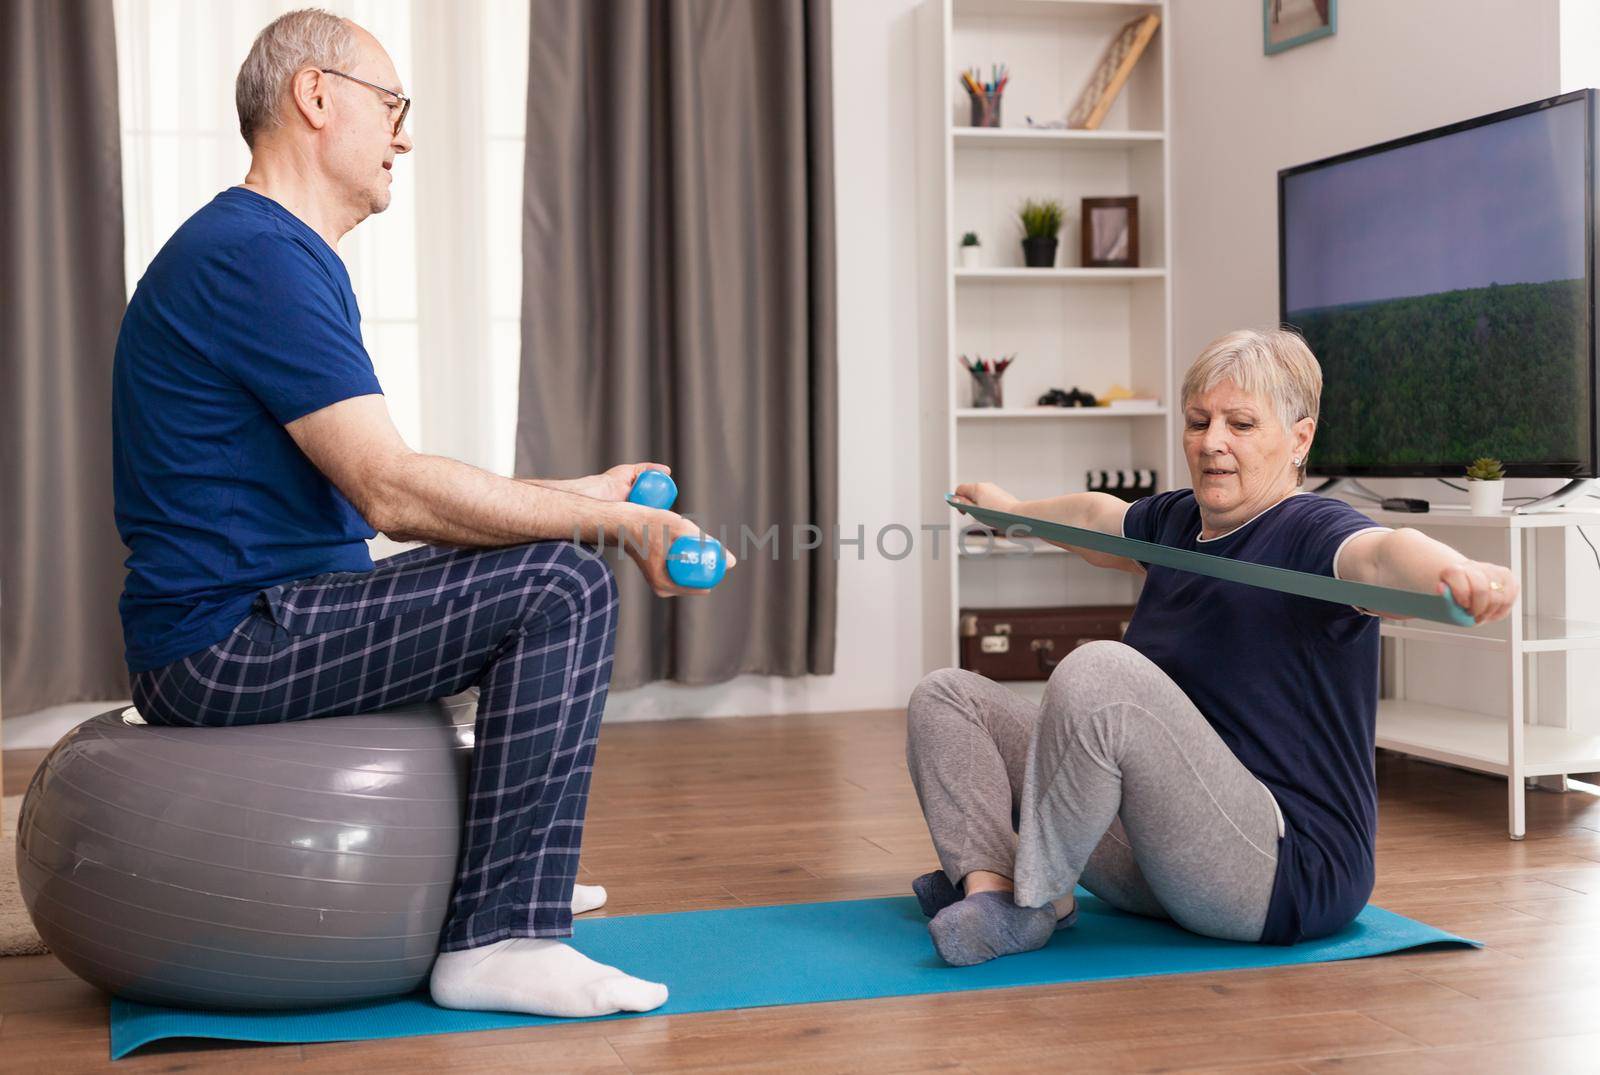 Older couple training each other for a healthy life. Old person healthy lifestyle exercise at home, workout and training, sport activity at home on yoga mat.